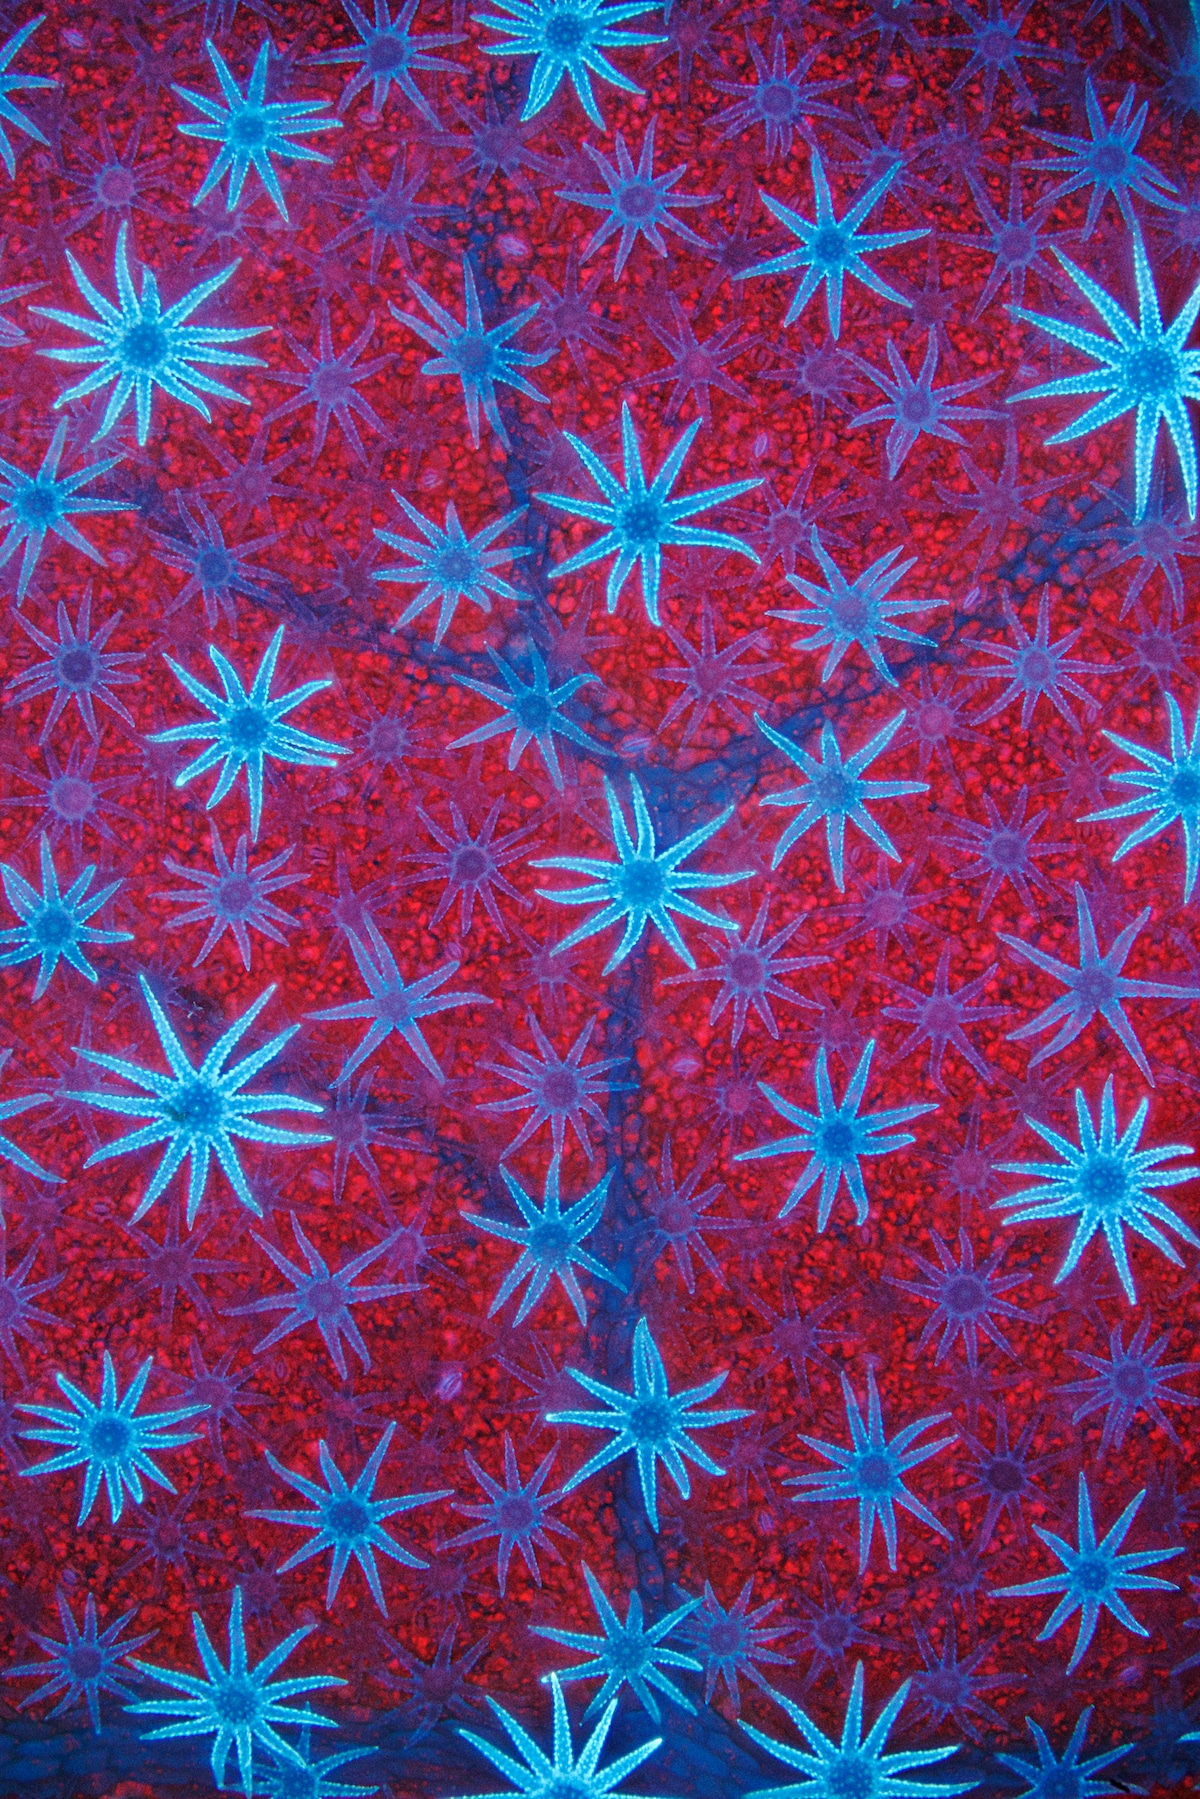 Blue autofluorescent, star-shaped defensive hairs cover the surface of a Deutzia leaf.